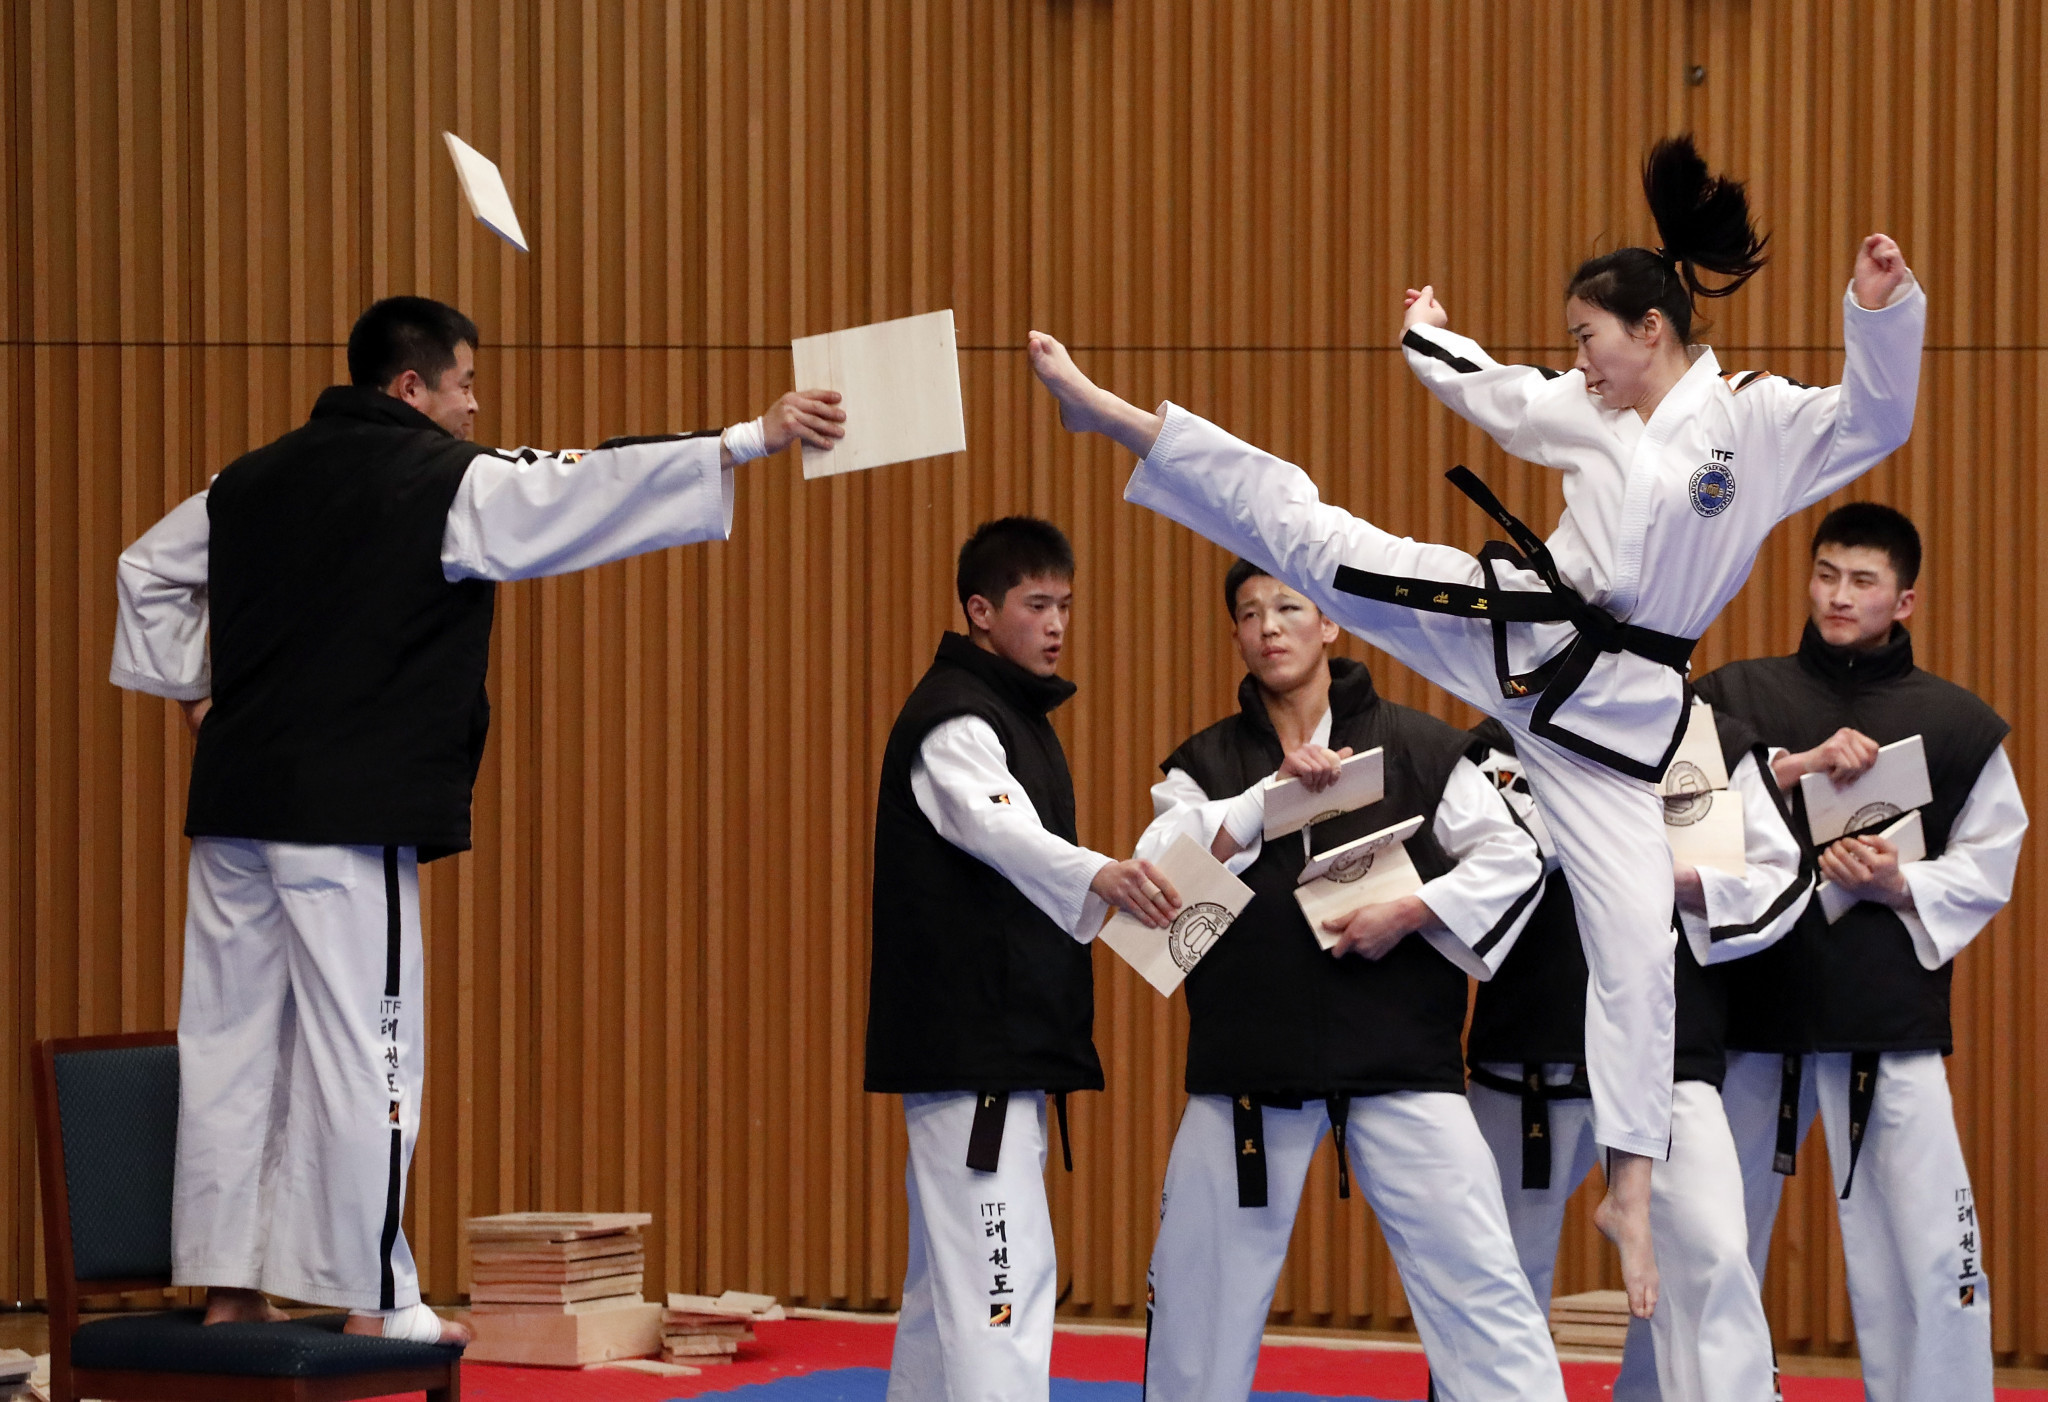 Joint taekwondo demonstrations have taken place alongside the Pyeongchang 2018 Winter Olympics ©Getty Images